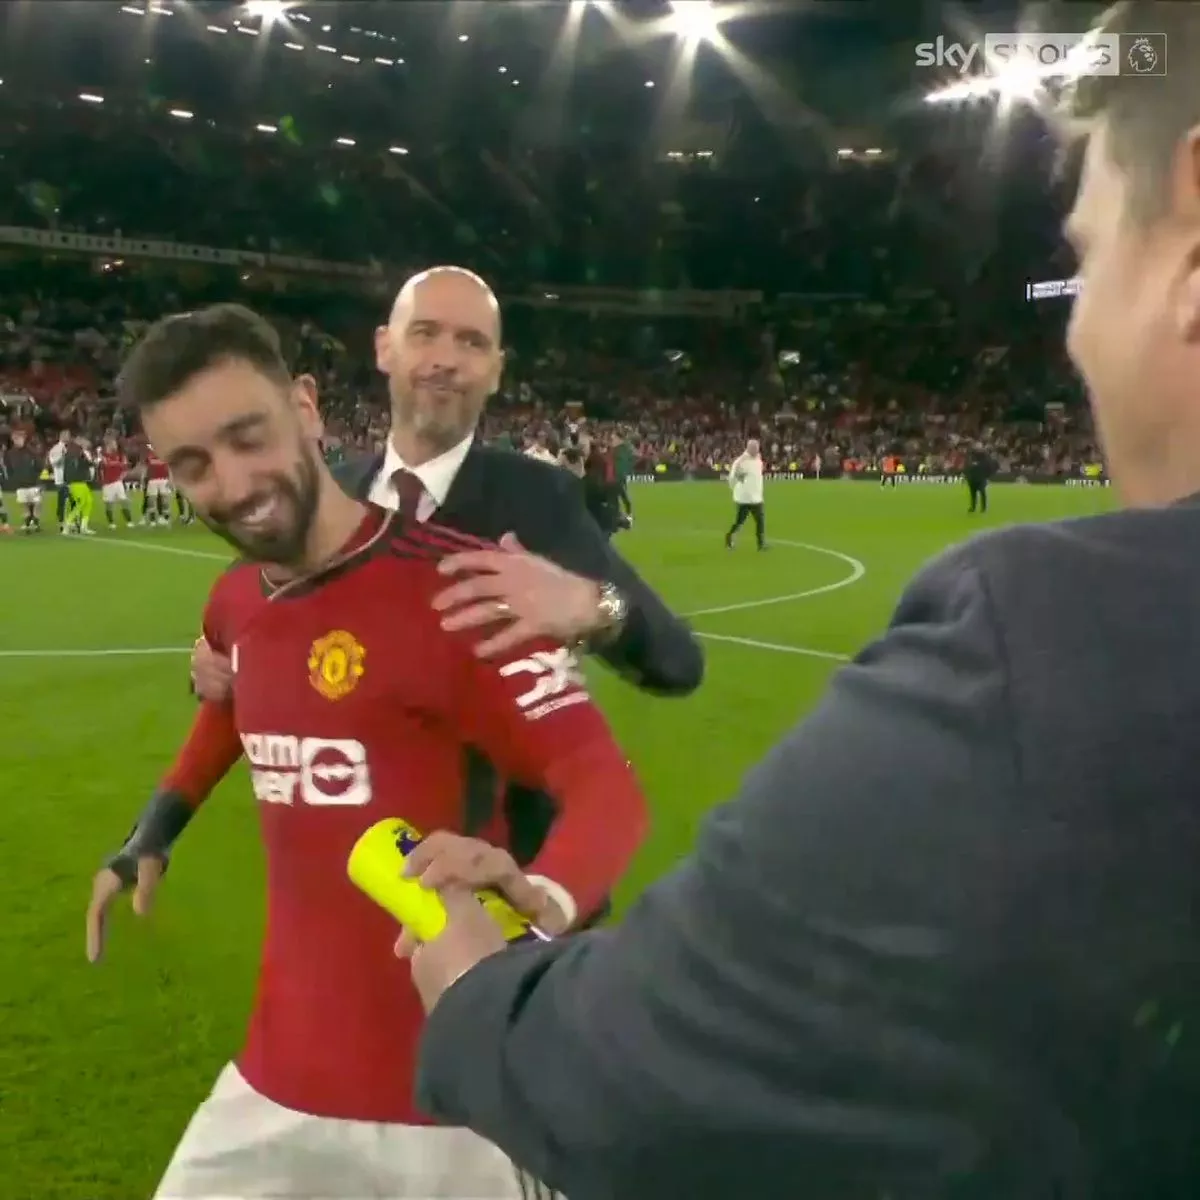 Erik ten Hag drags Bruno Fernandes away from Sky interview after he's asked about his future